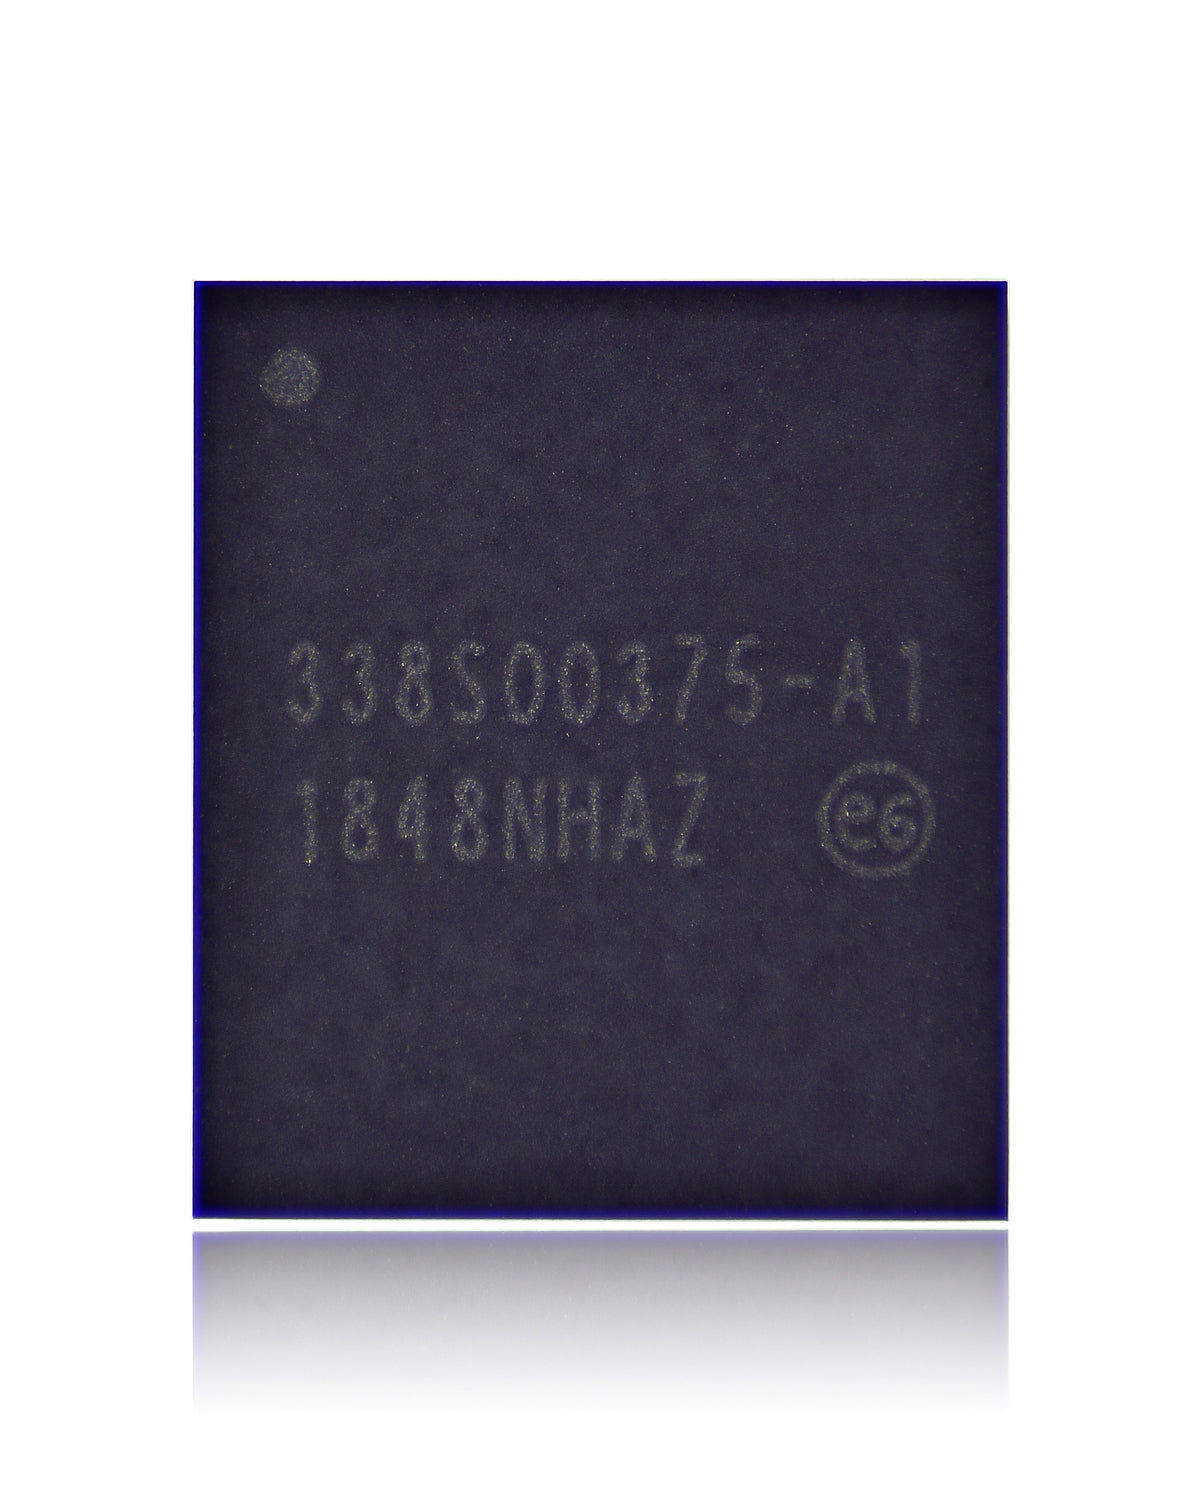 CAMERA POWER MANAGEMENT IC COMPATIBLE WITH IPHONE XR / XS / XS MAX (338S00375)